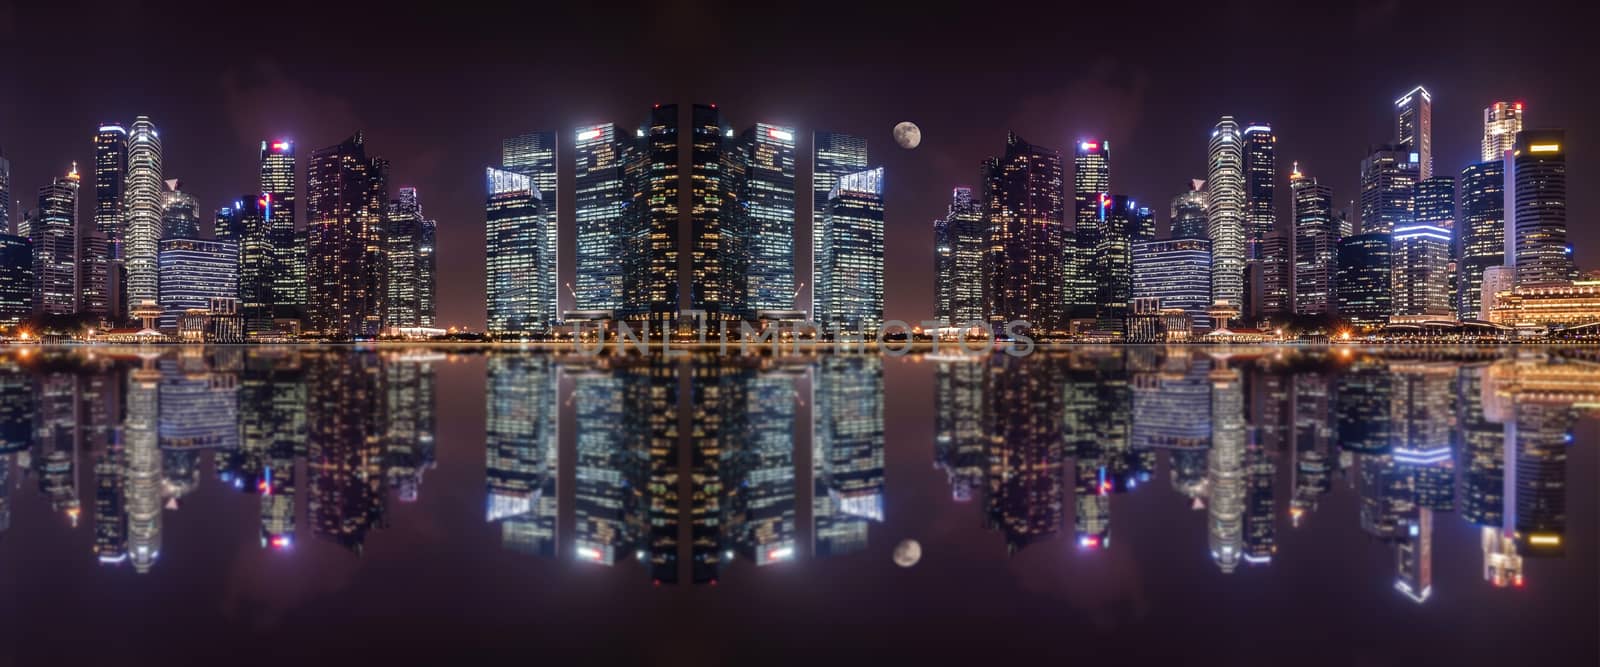 Panoramic view at night of  a megalopolis skyscrapers. by wattanaphob